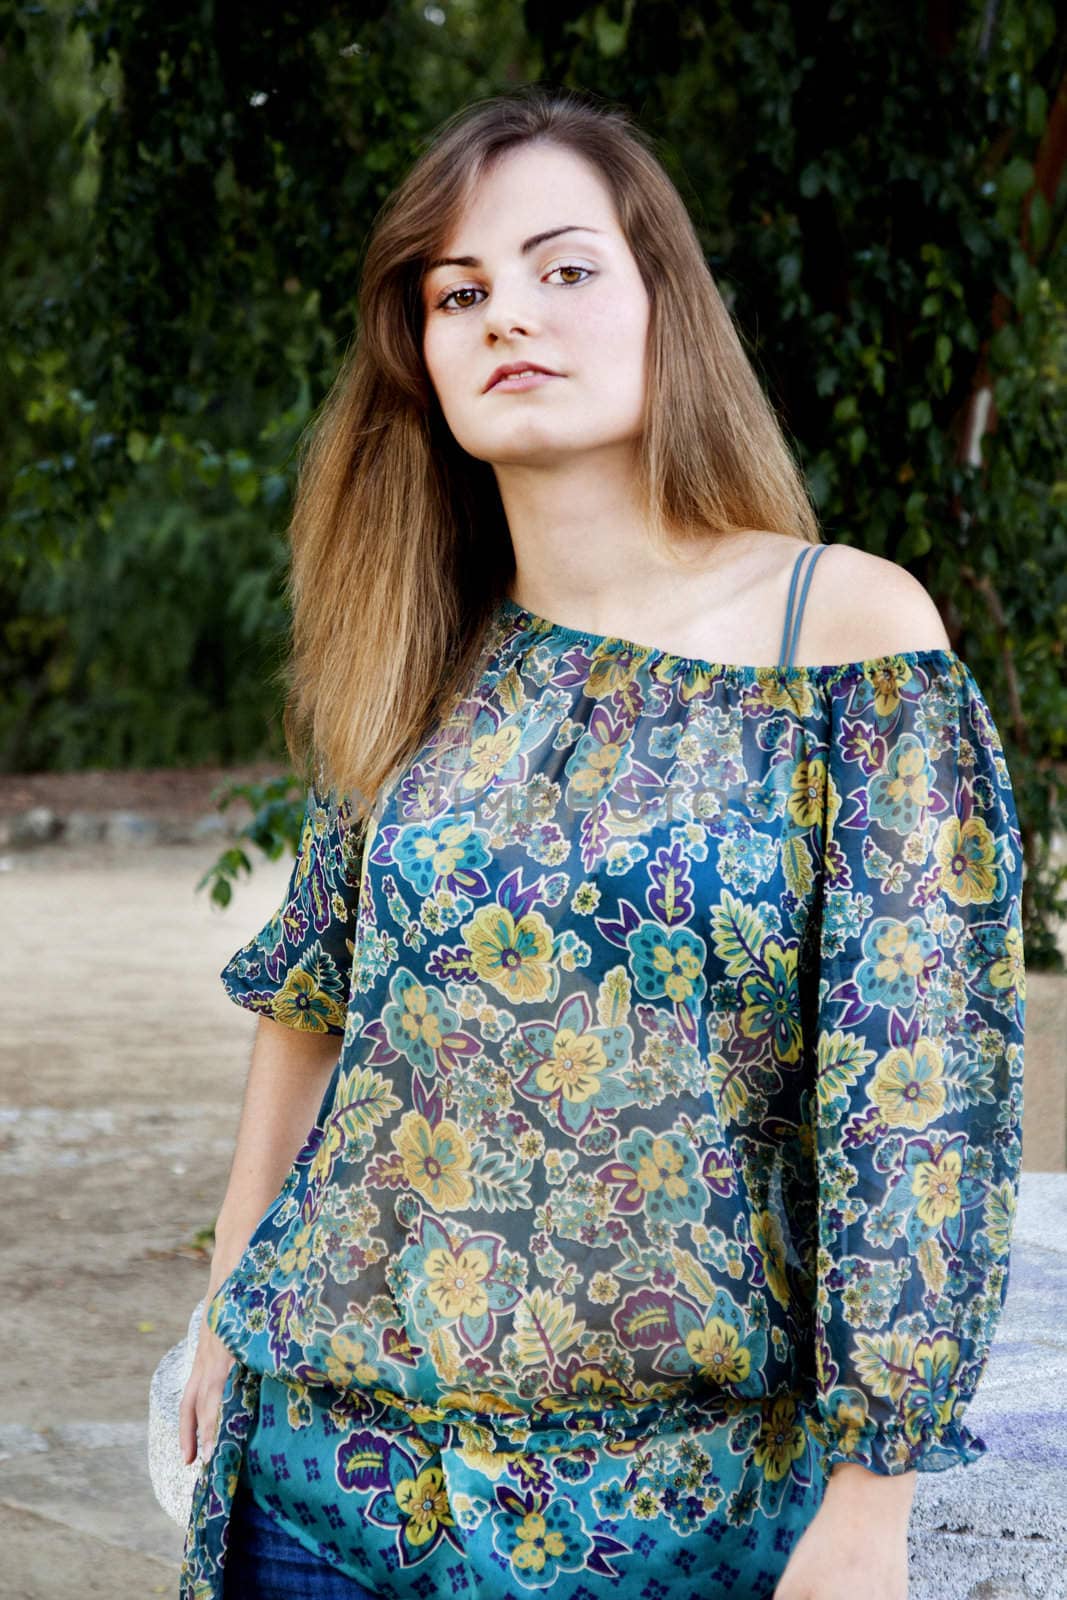 View of a beautiful girl on a floral dress on a park.